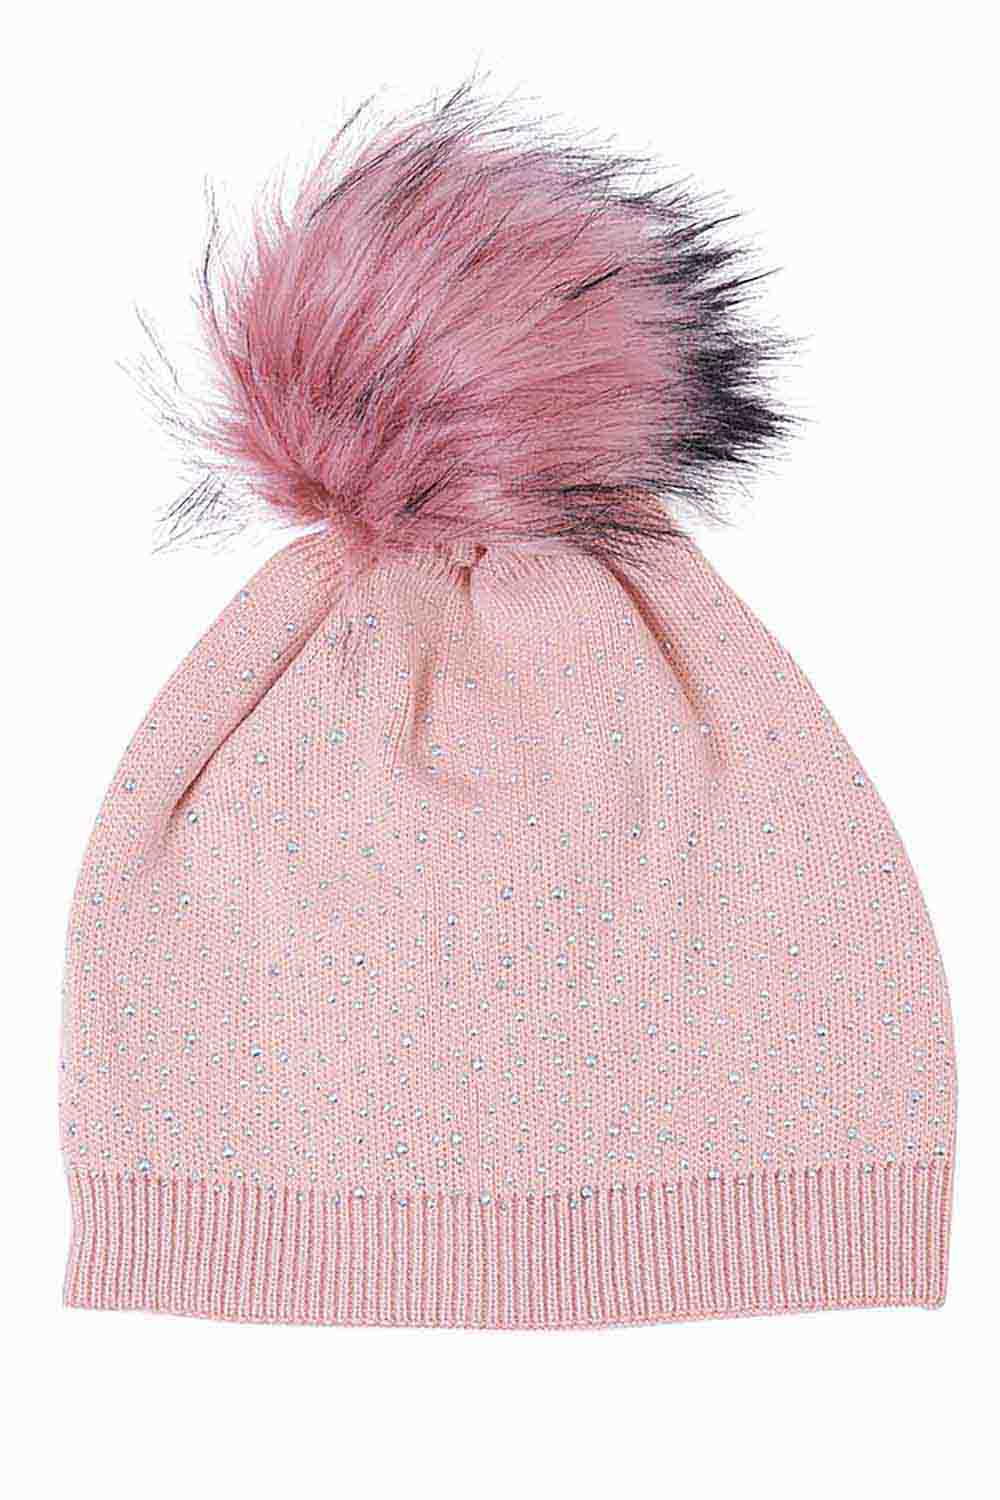 Stoned Beanie (Pink) 